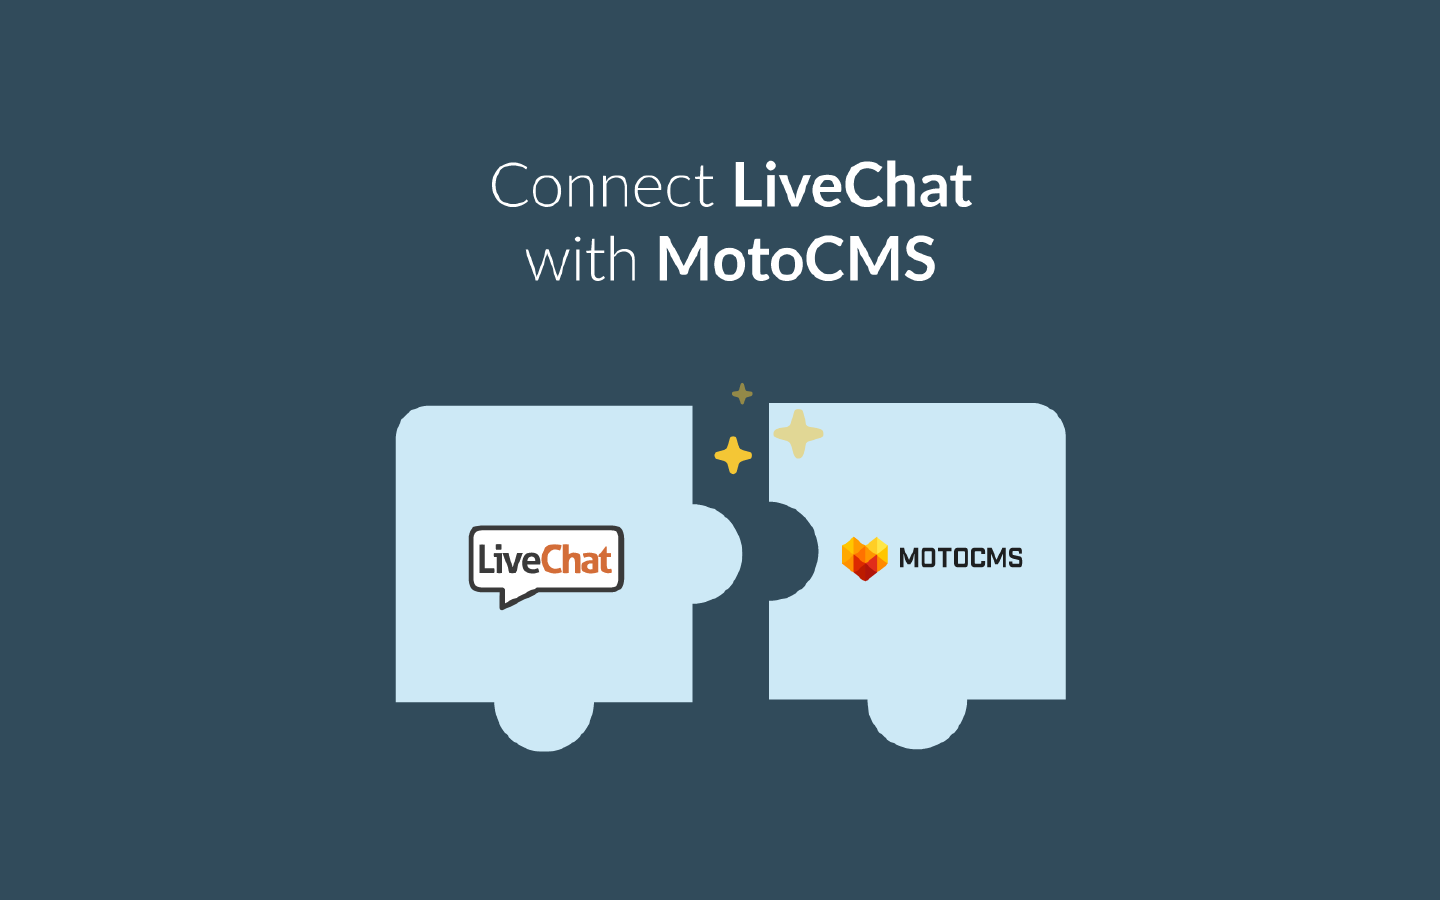 Connect LiveChat with MotoCMS